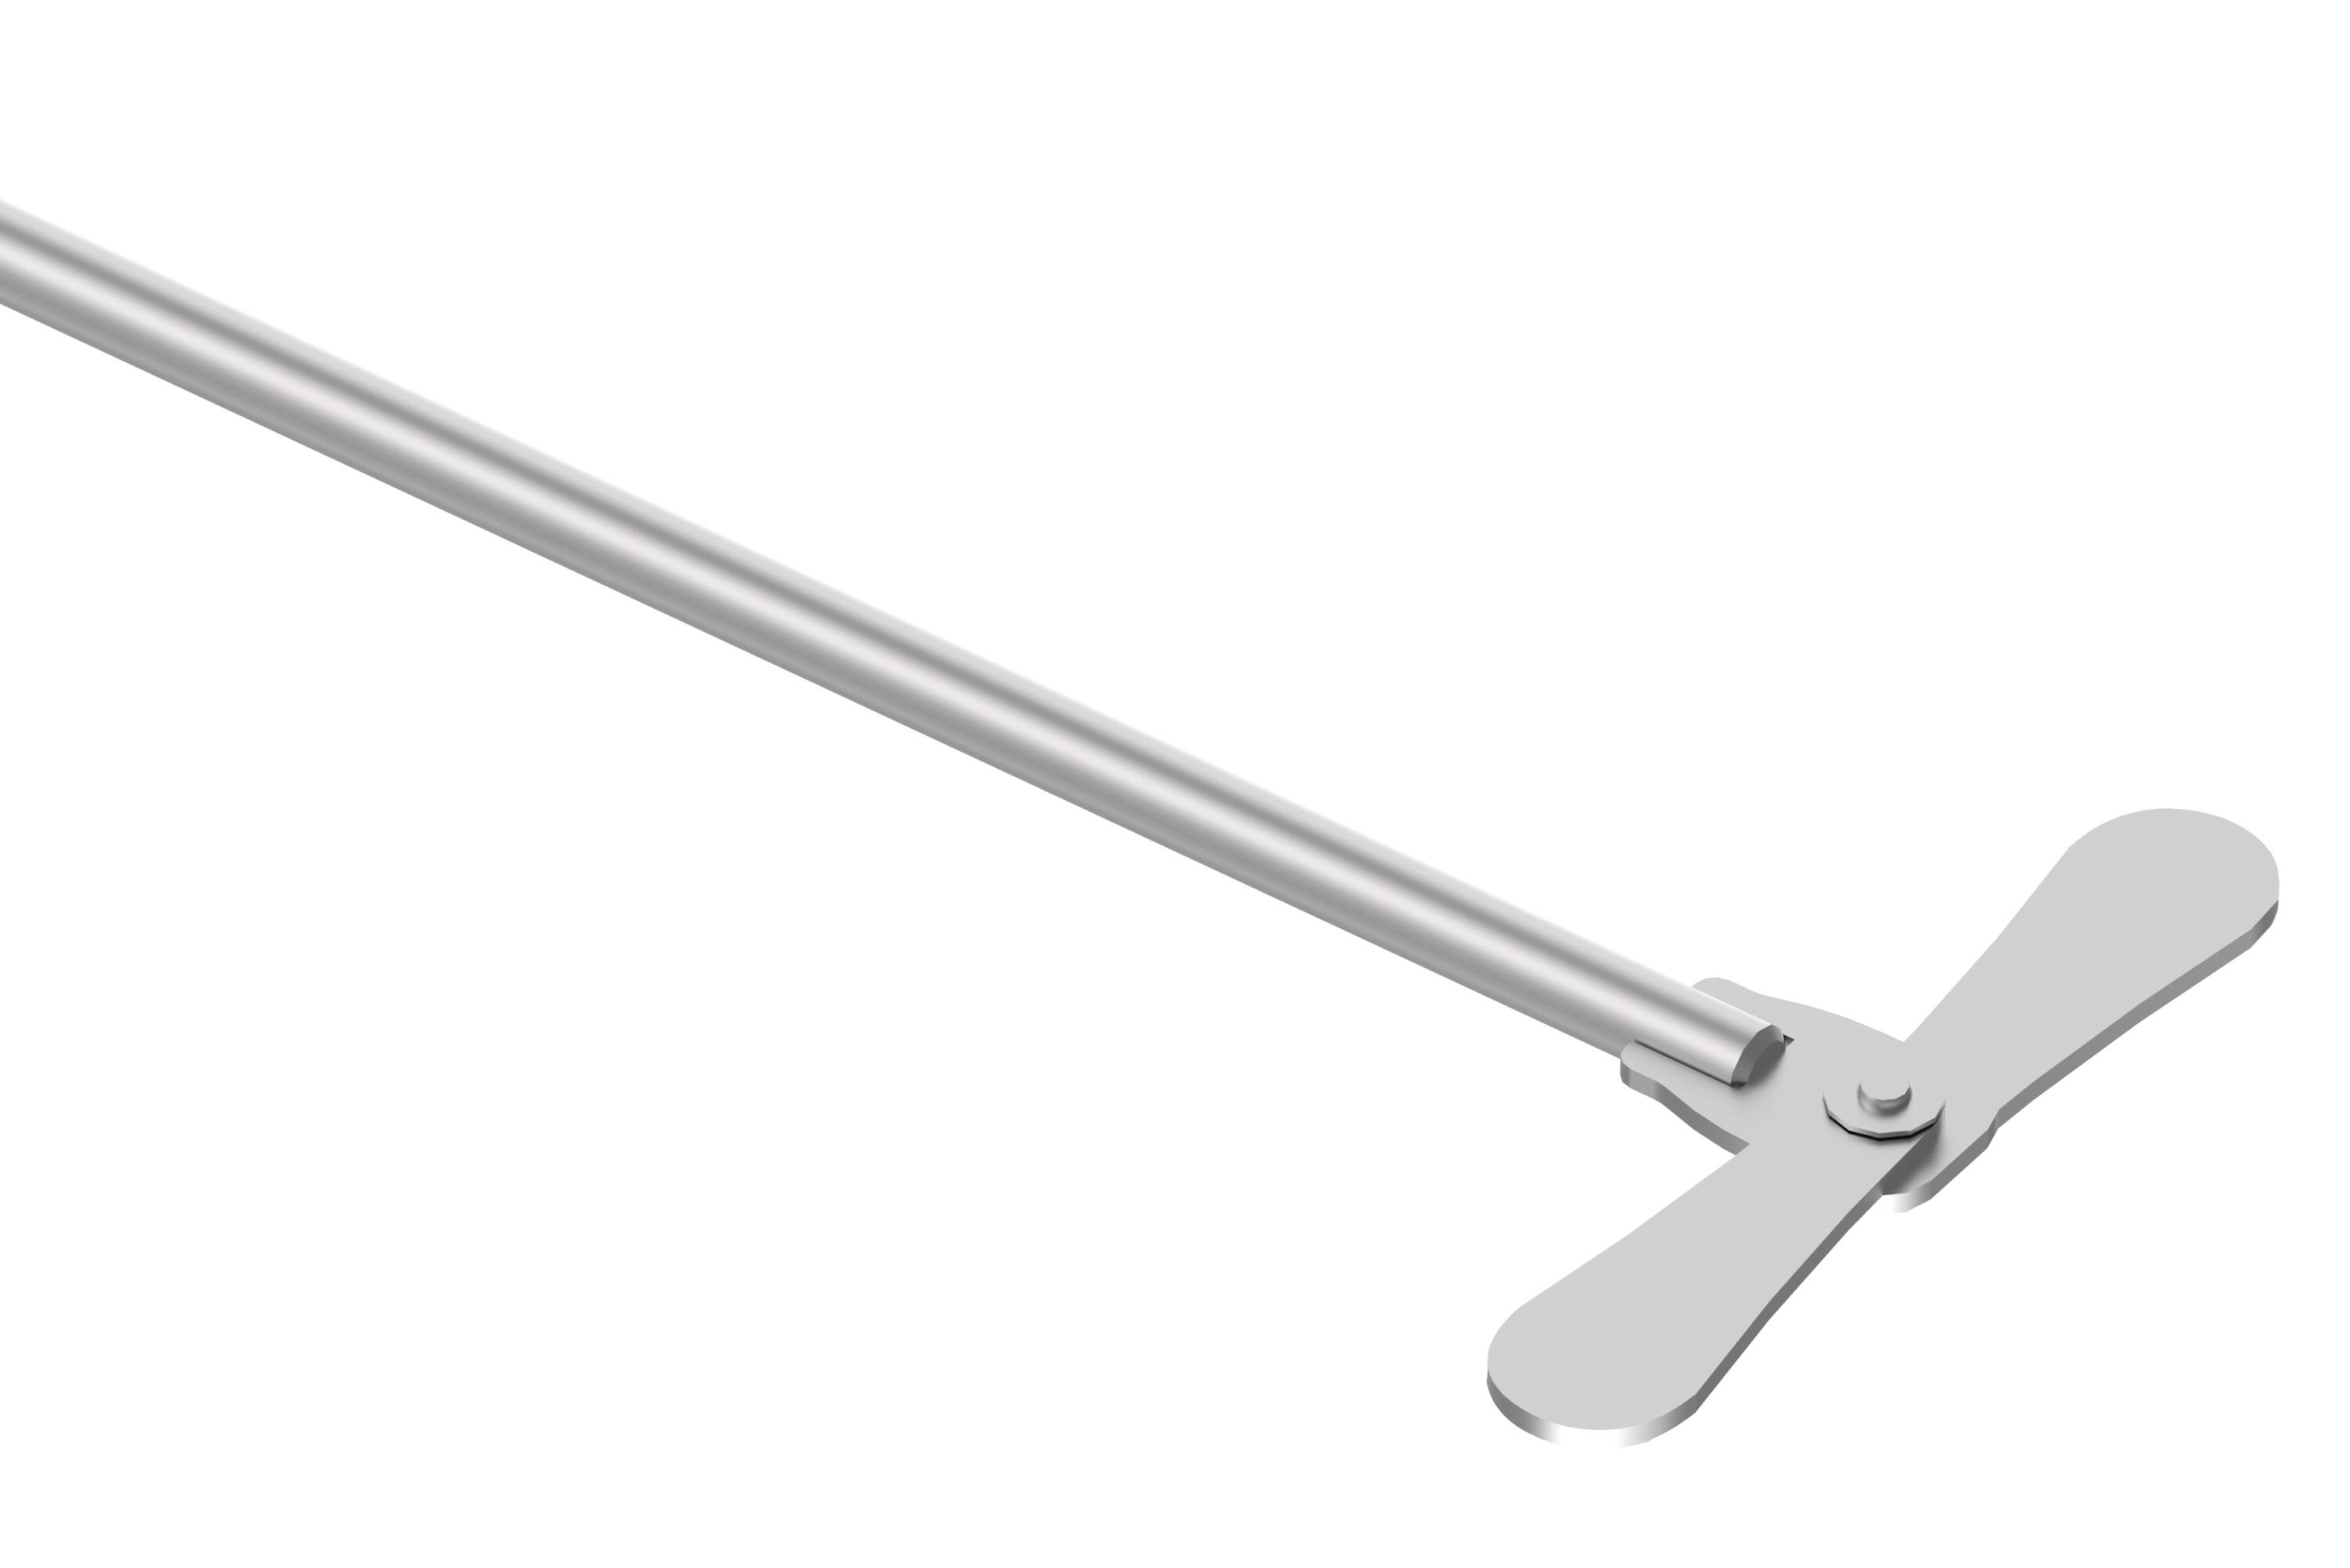 Stainless steel paddle stirrer for laboratory and homebrewing